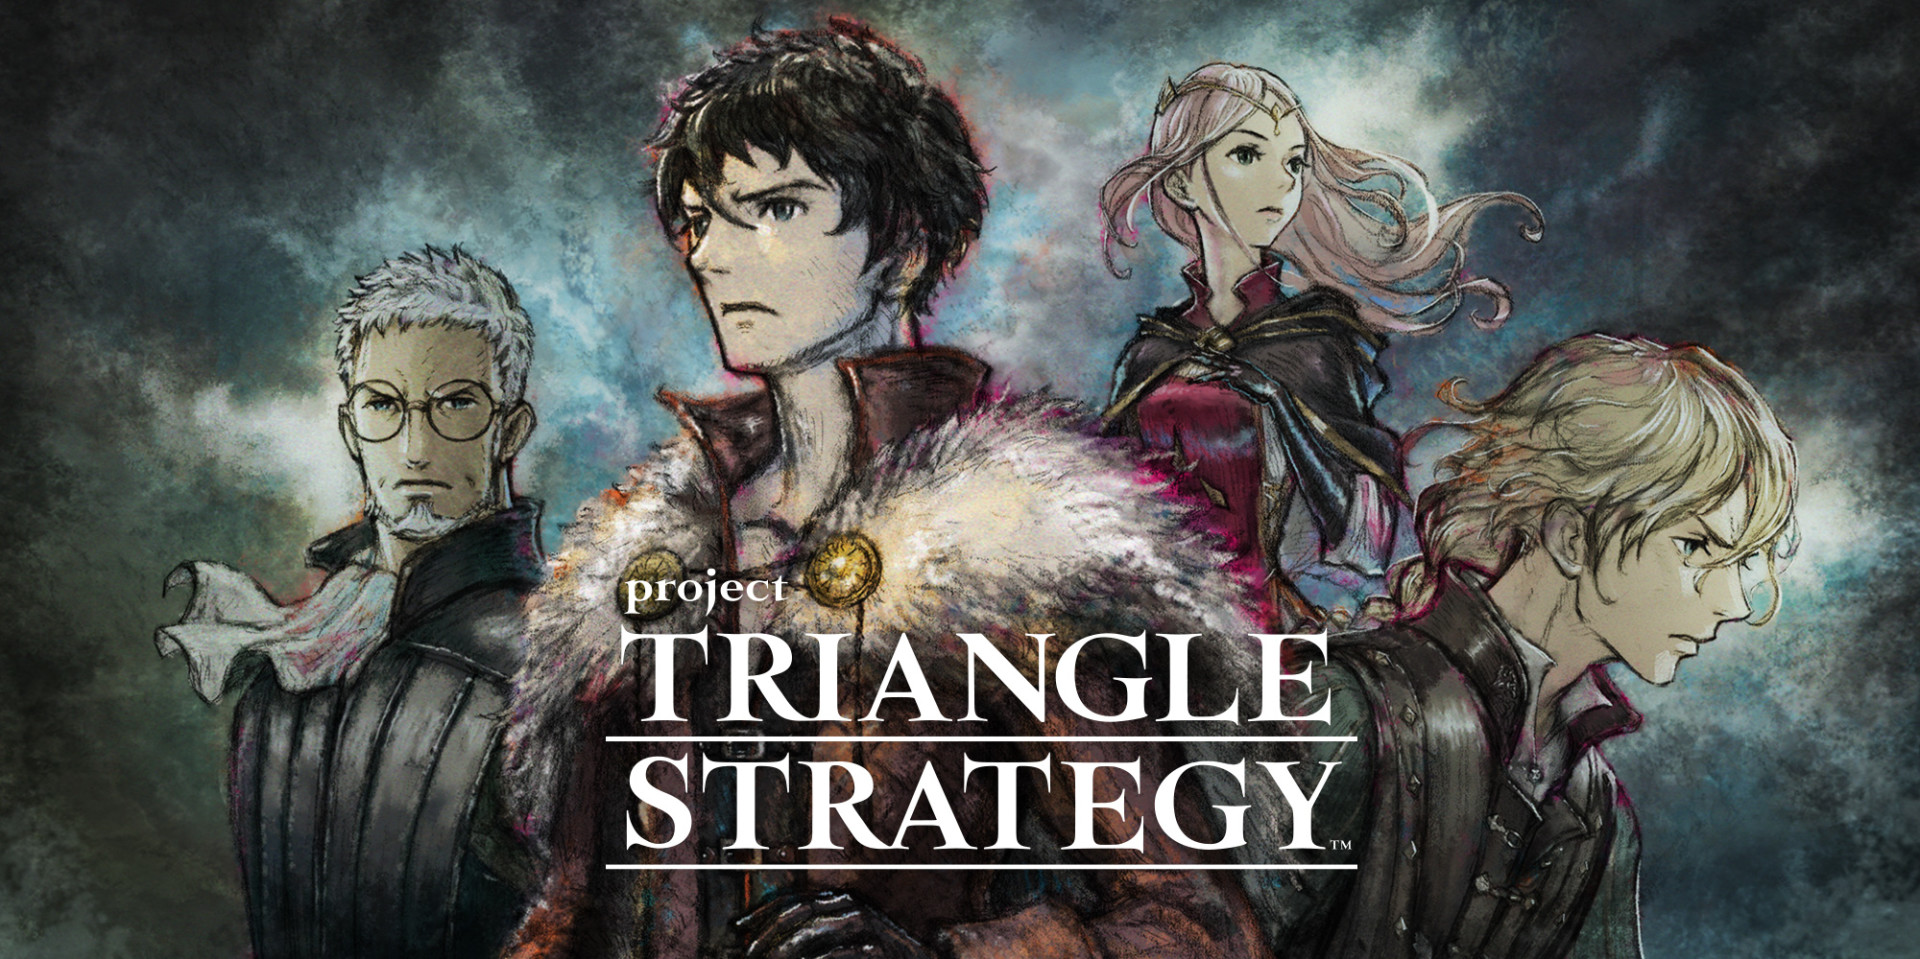 triangle strategy 2 download free